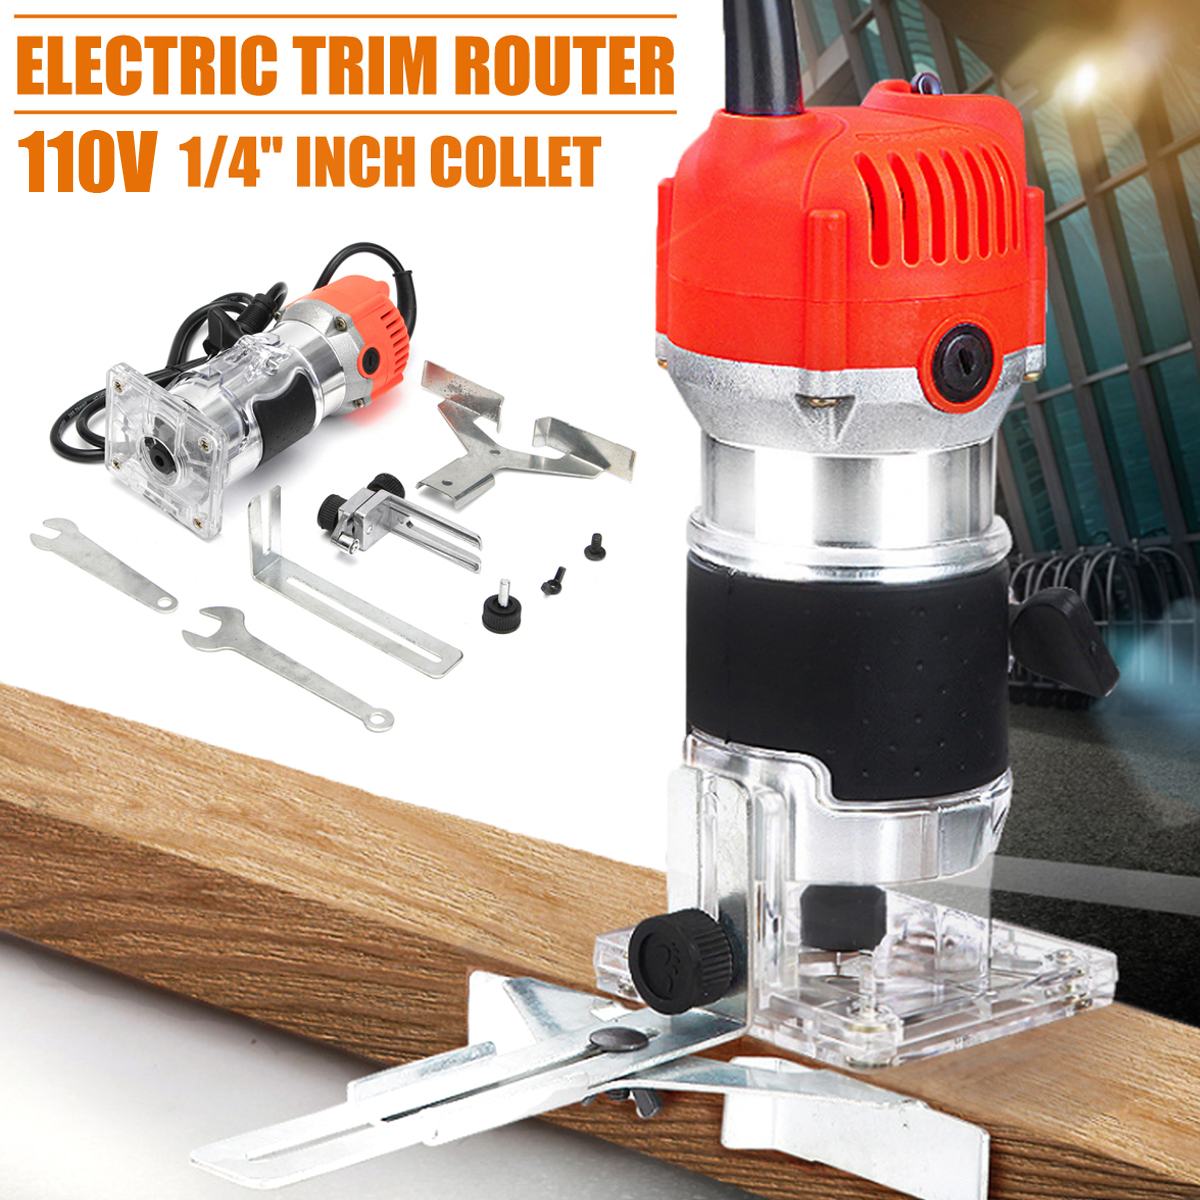 110V220V-680W-Trim-Router-Edge-Woodworking-Wood-Clean-Cuts-Power-Tool-Set-33000RPM-with-Box-1245528